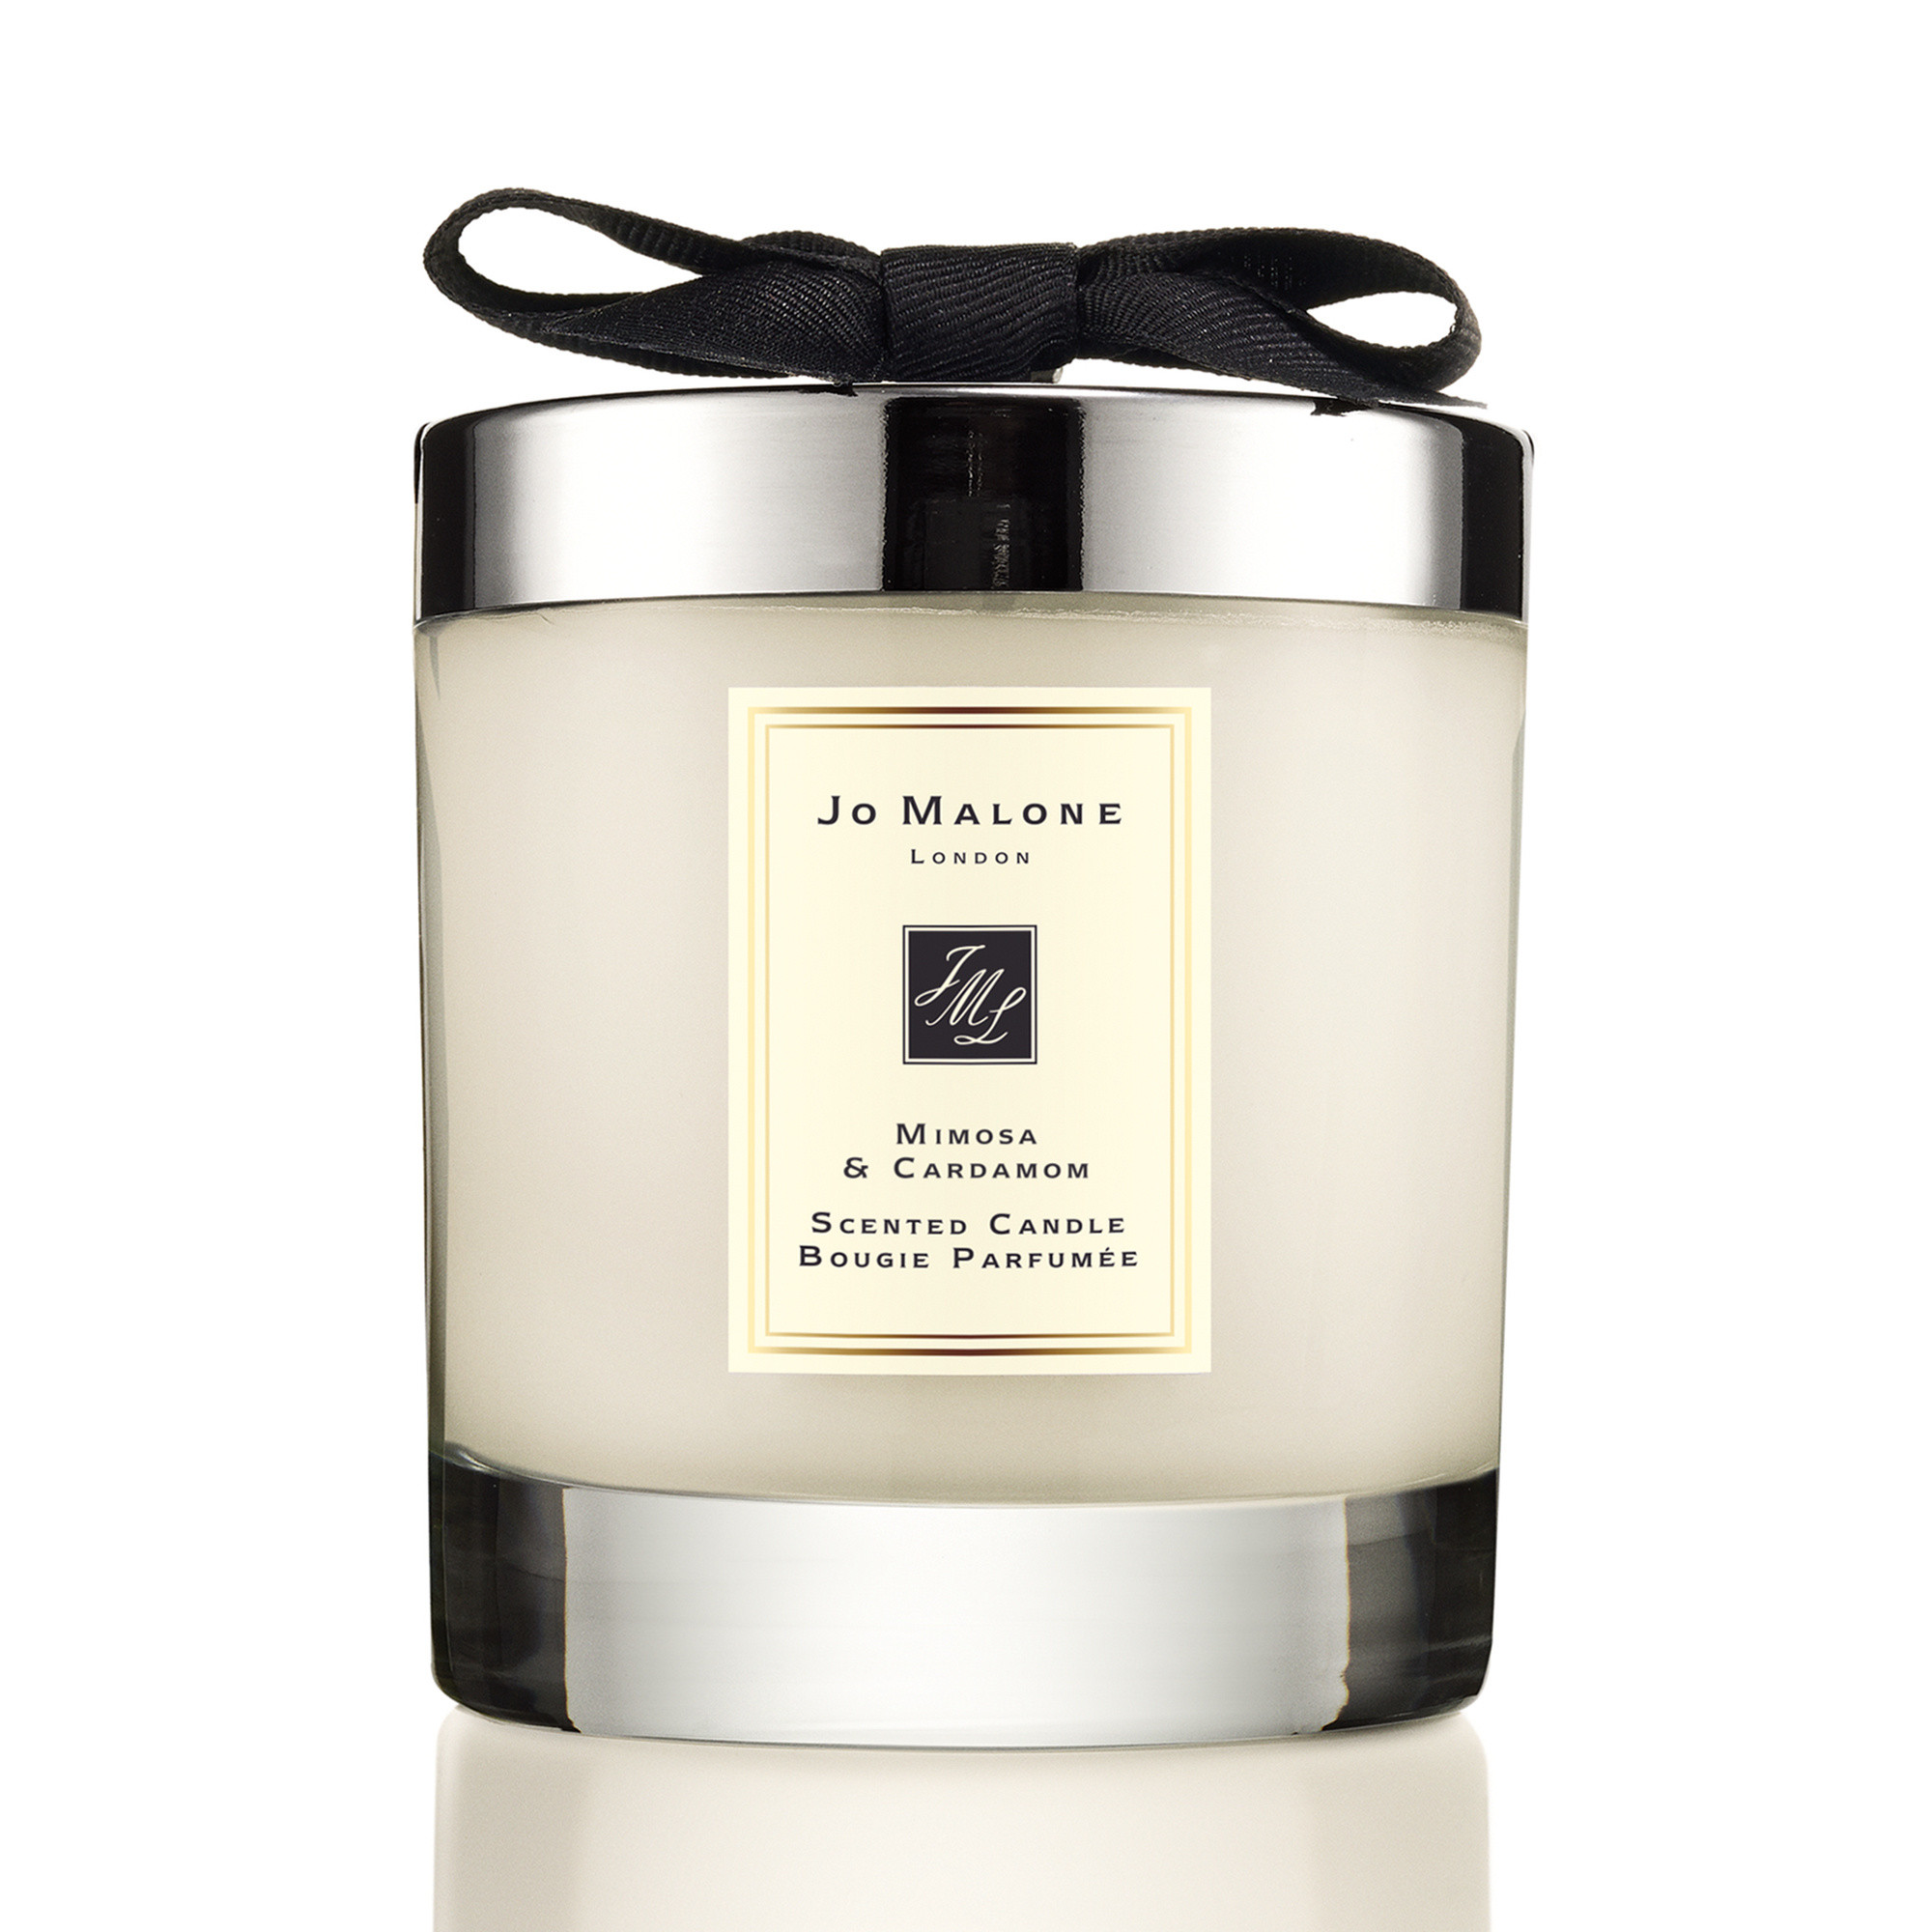 Jo Malone London mimosa & cardamom home candle 200 g, Black, large image number 0